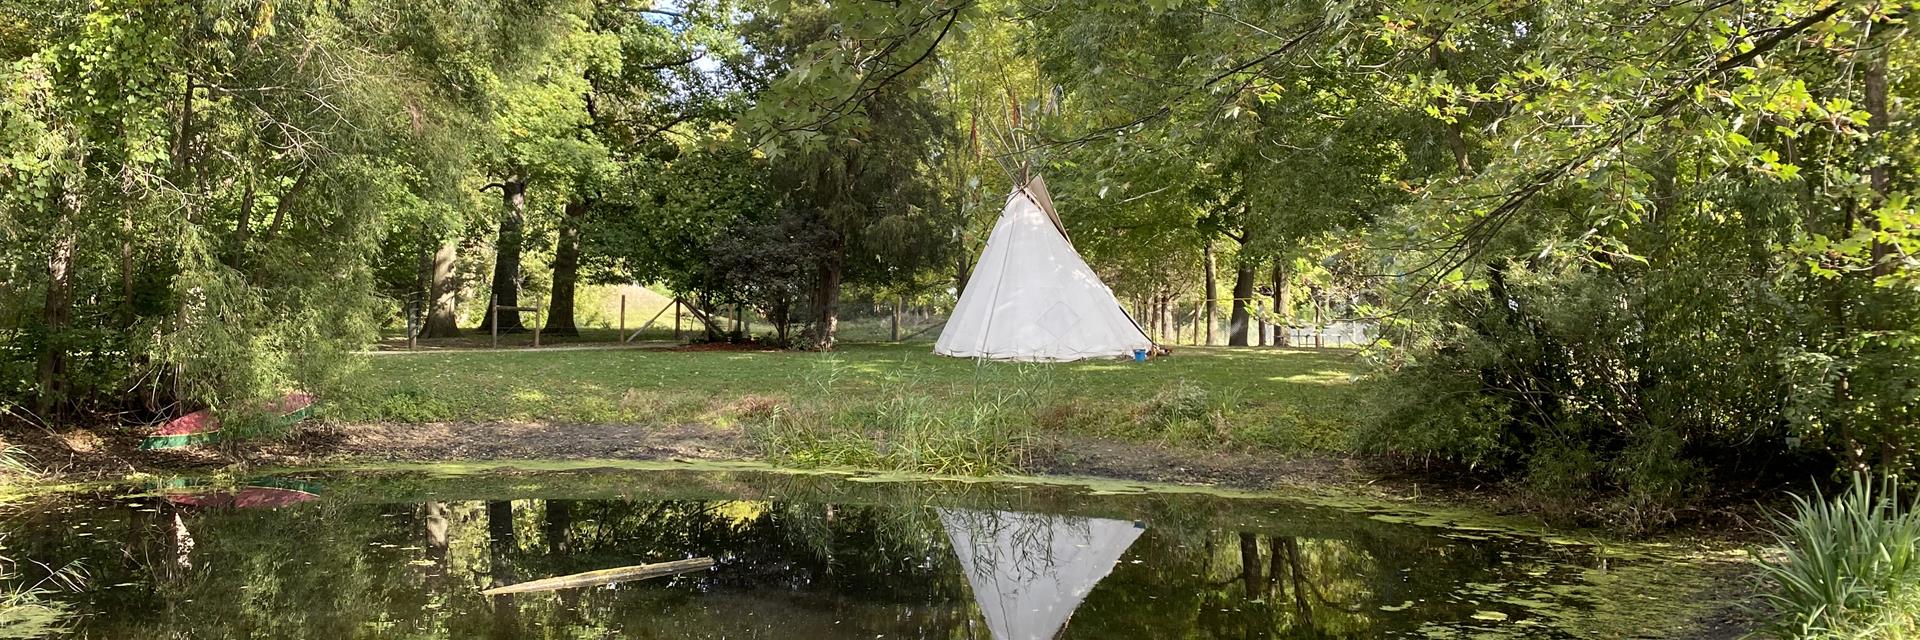 tipi with water and grass